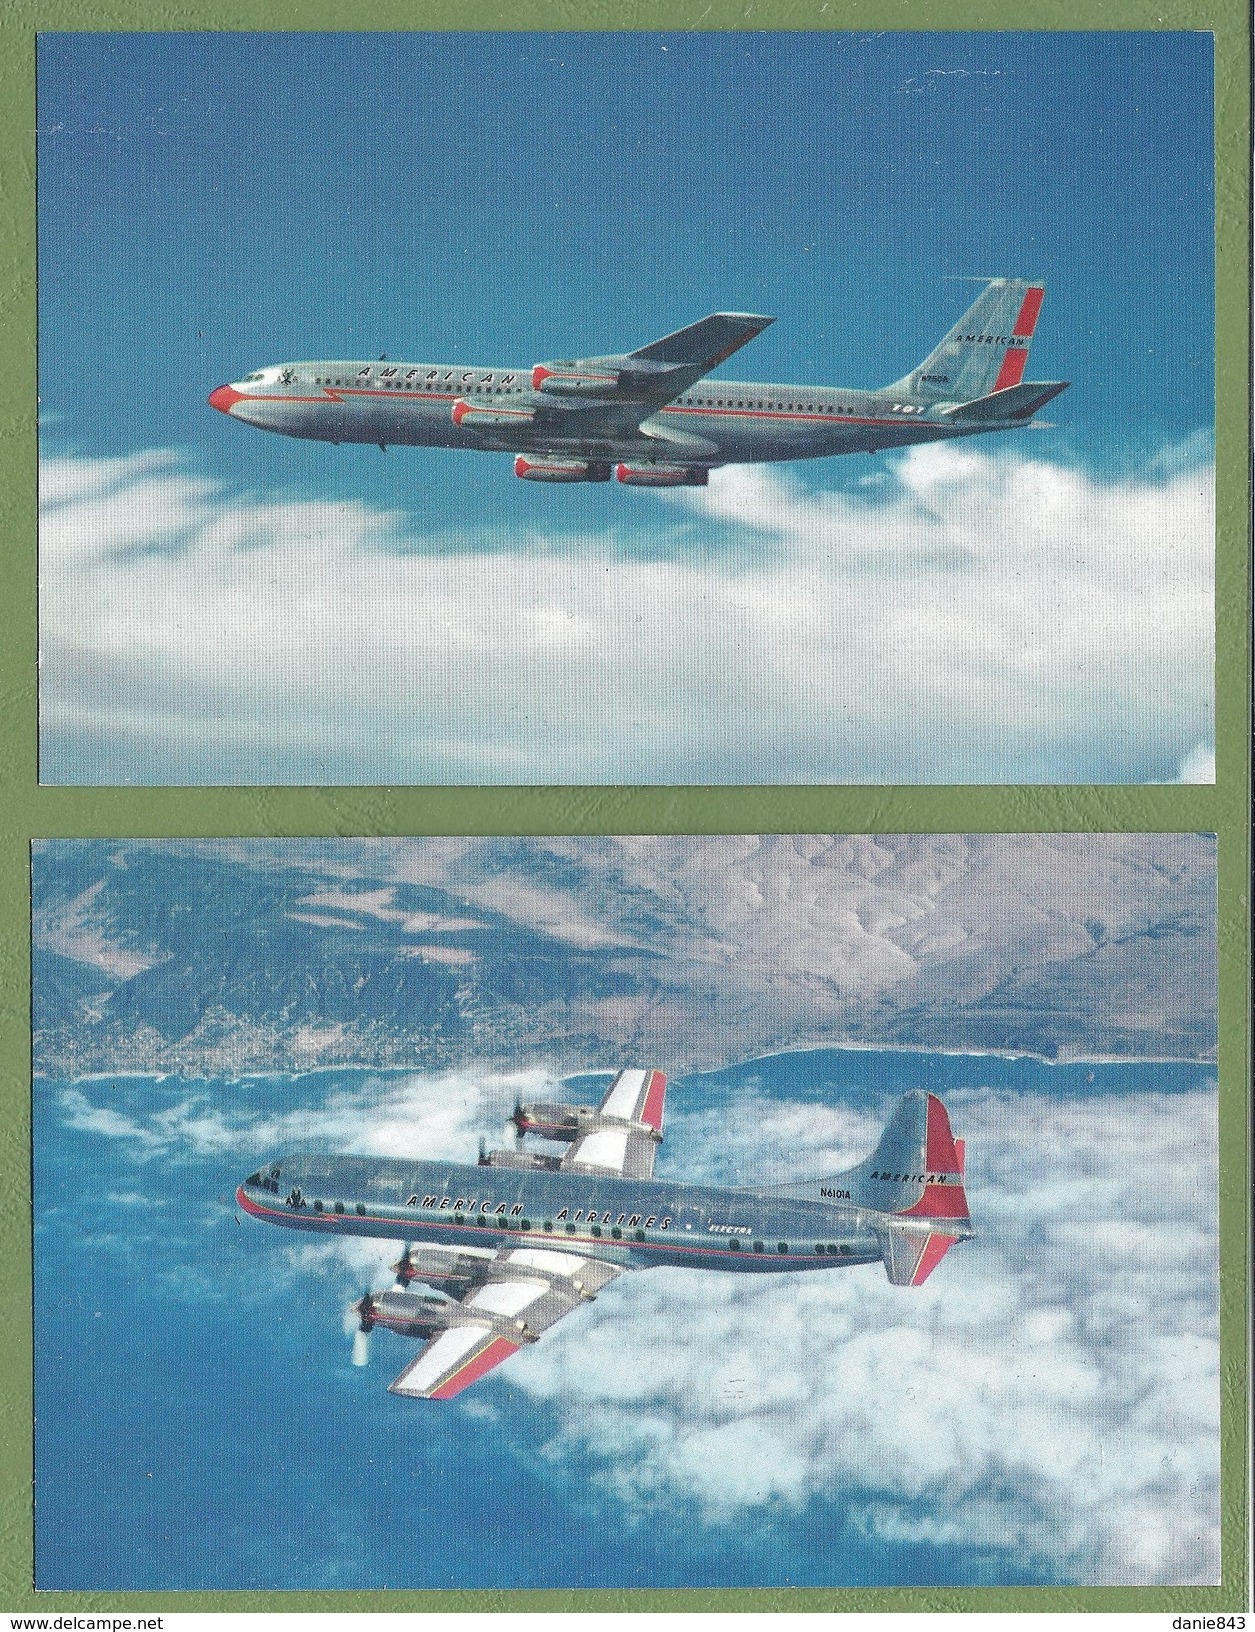 2 CPSM - AMERICAN AIRLINES - AVIATION - APPAREIL DC 7 & JET POWERED ELECTRA FLAGSHIPS - LITHO IN USA / T151-11 & 12 - 1946-....: Moderne